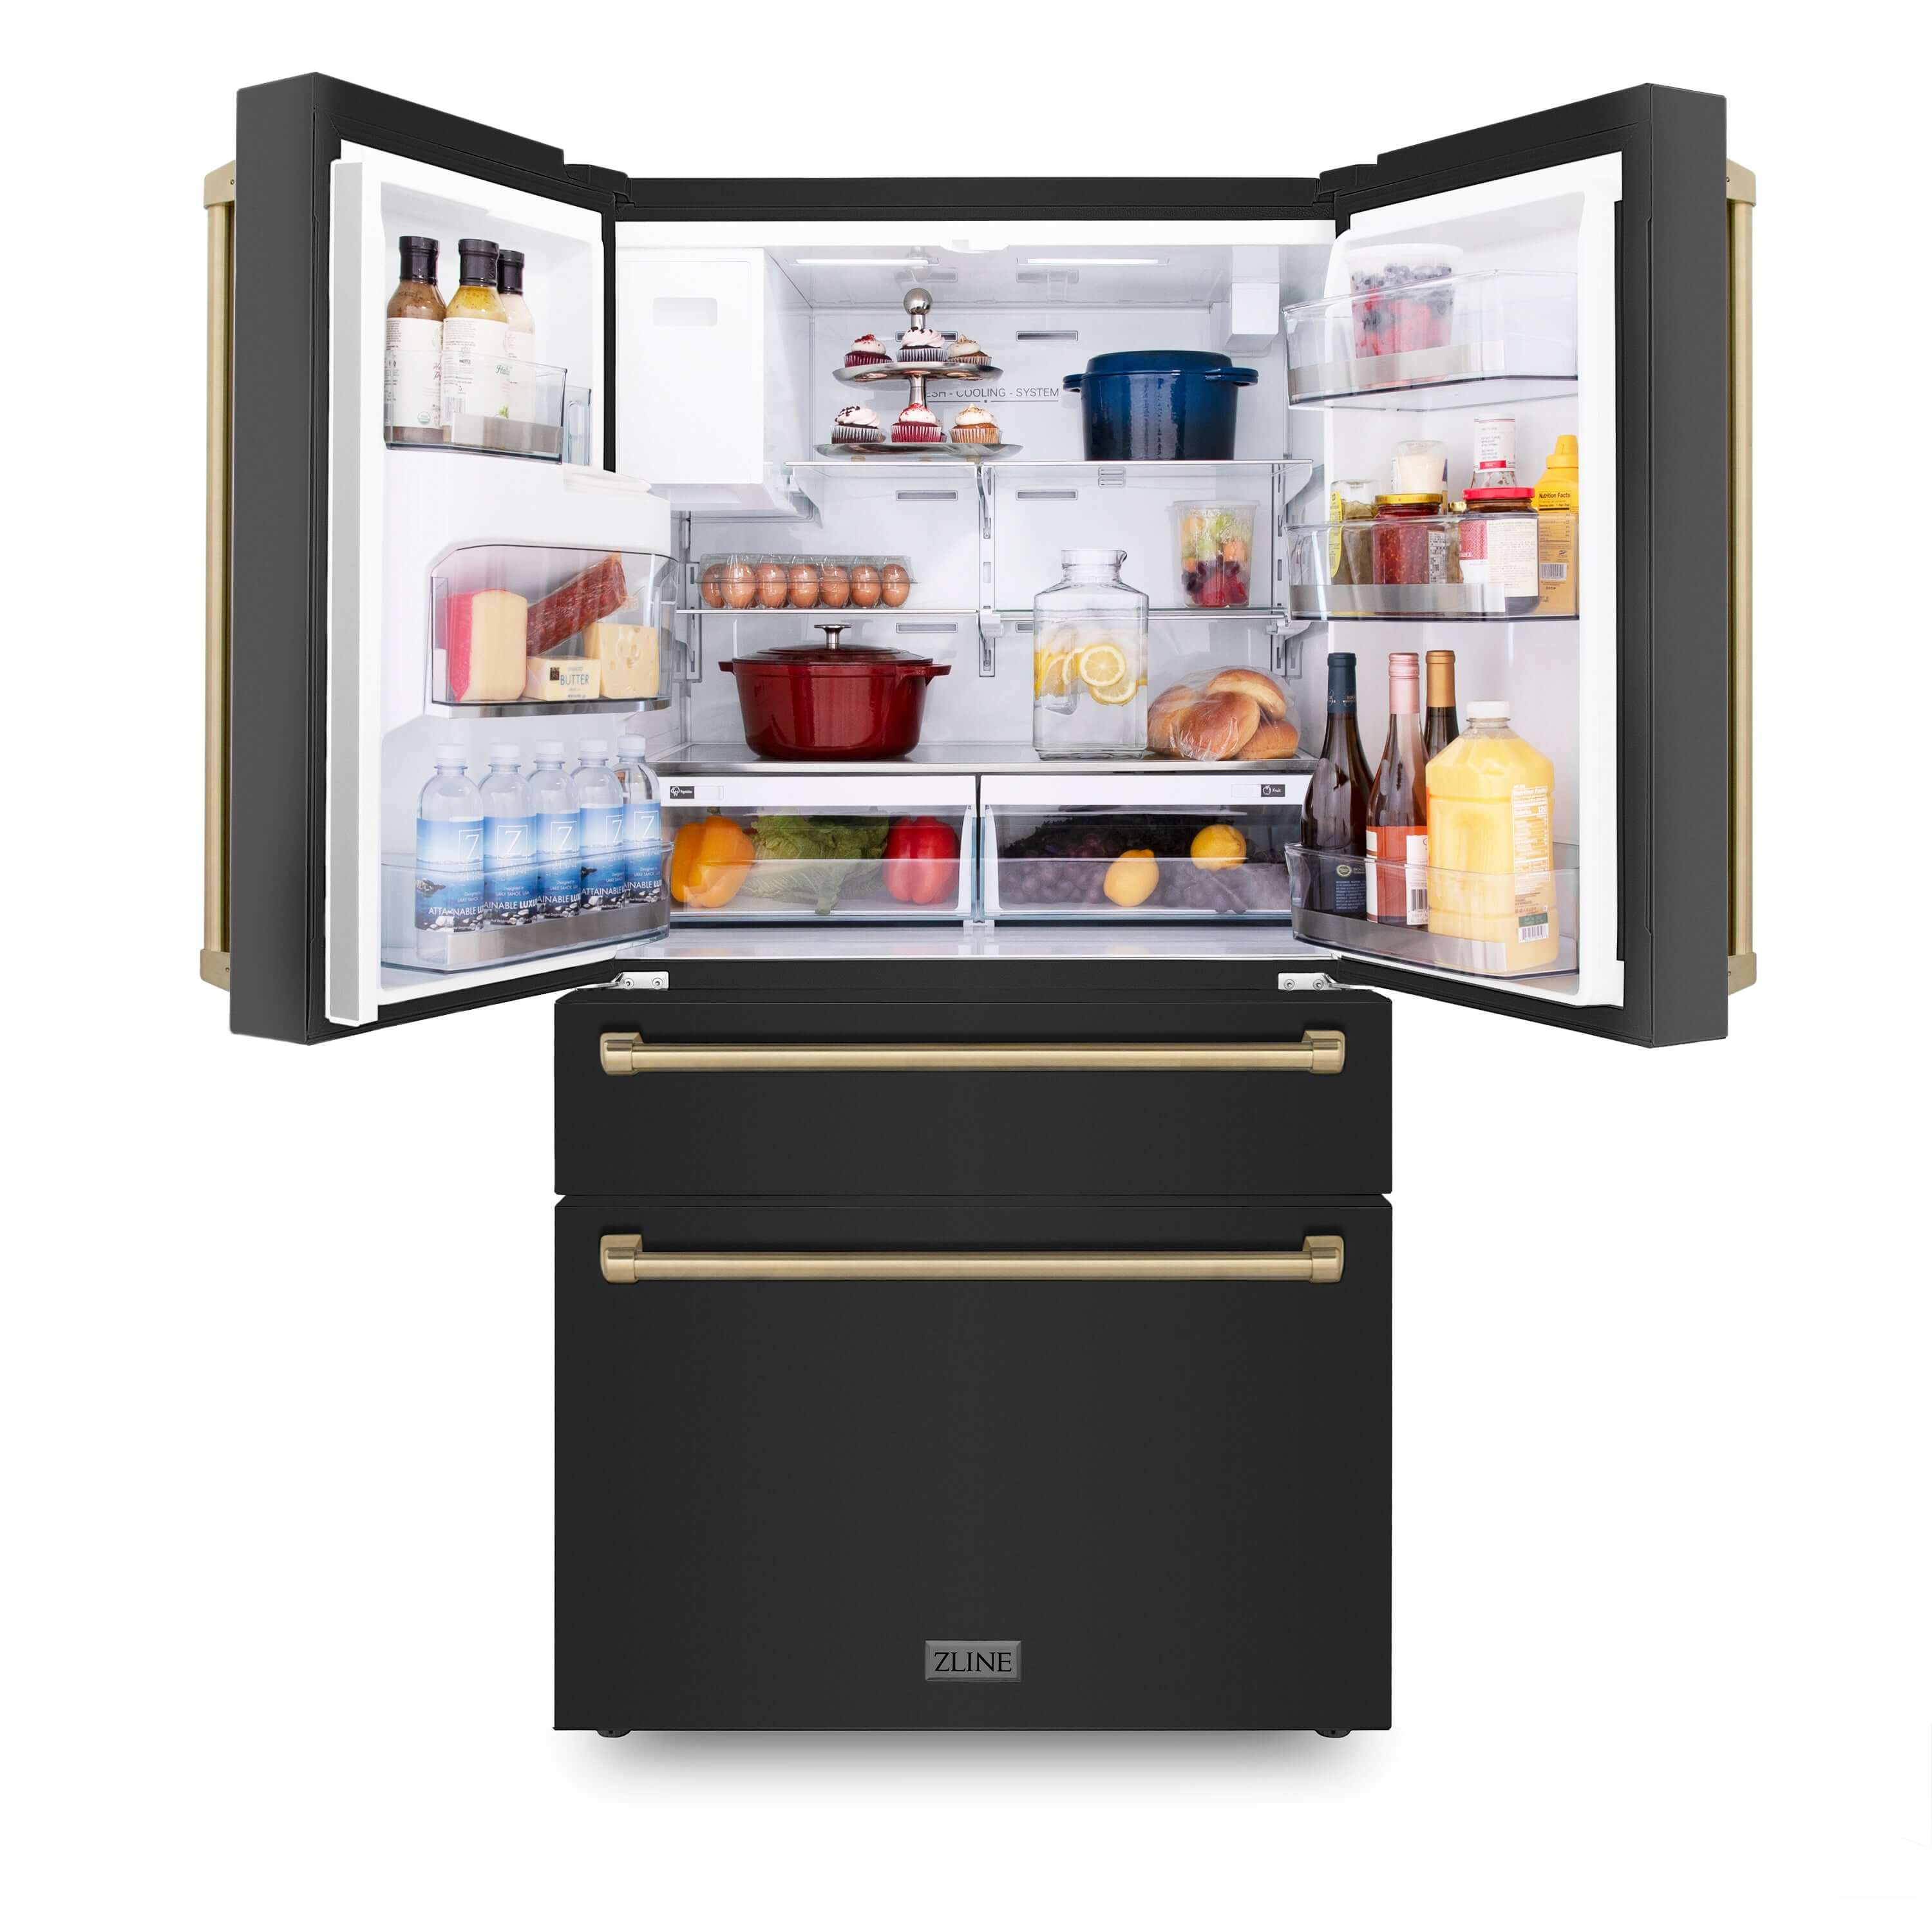 ZLINE Autograph Edition 36 in. 21.6 cu. ft Freestanding French Door Refrigerator with Water and Ice Dispenser in Fingerprint Resistant Black Stainless Steel with Champagne Bronze Accents (RFMZ-W-36-BS-CB) front, open.